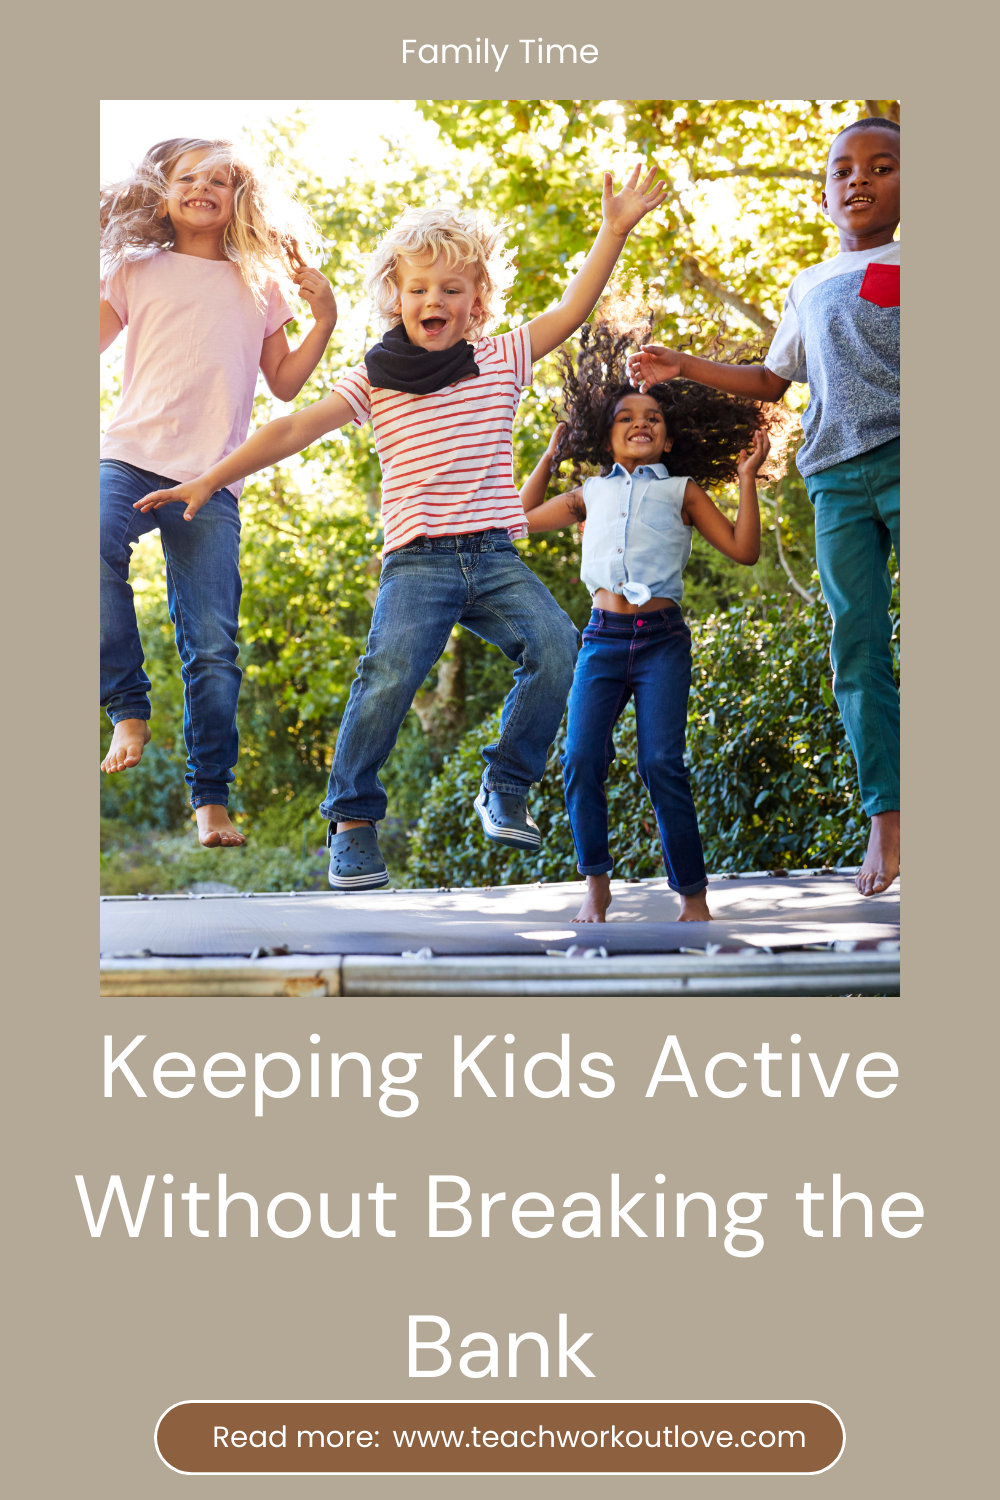 In an era of video games and endless screen time, getting kids off the sofa and active can feel like an uphill battle. However, physical activity is vital for children's health and wellbeing. The good news is there are plenty of budget-friendly ways to encourage active play. With a little creativity and planning, you can keep your kids fit without breaking the bank.